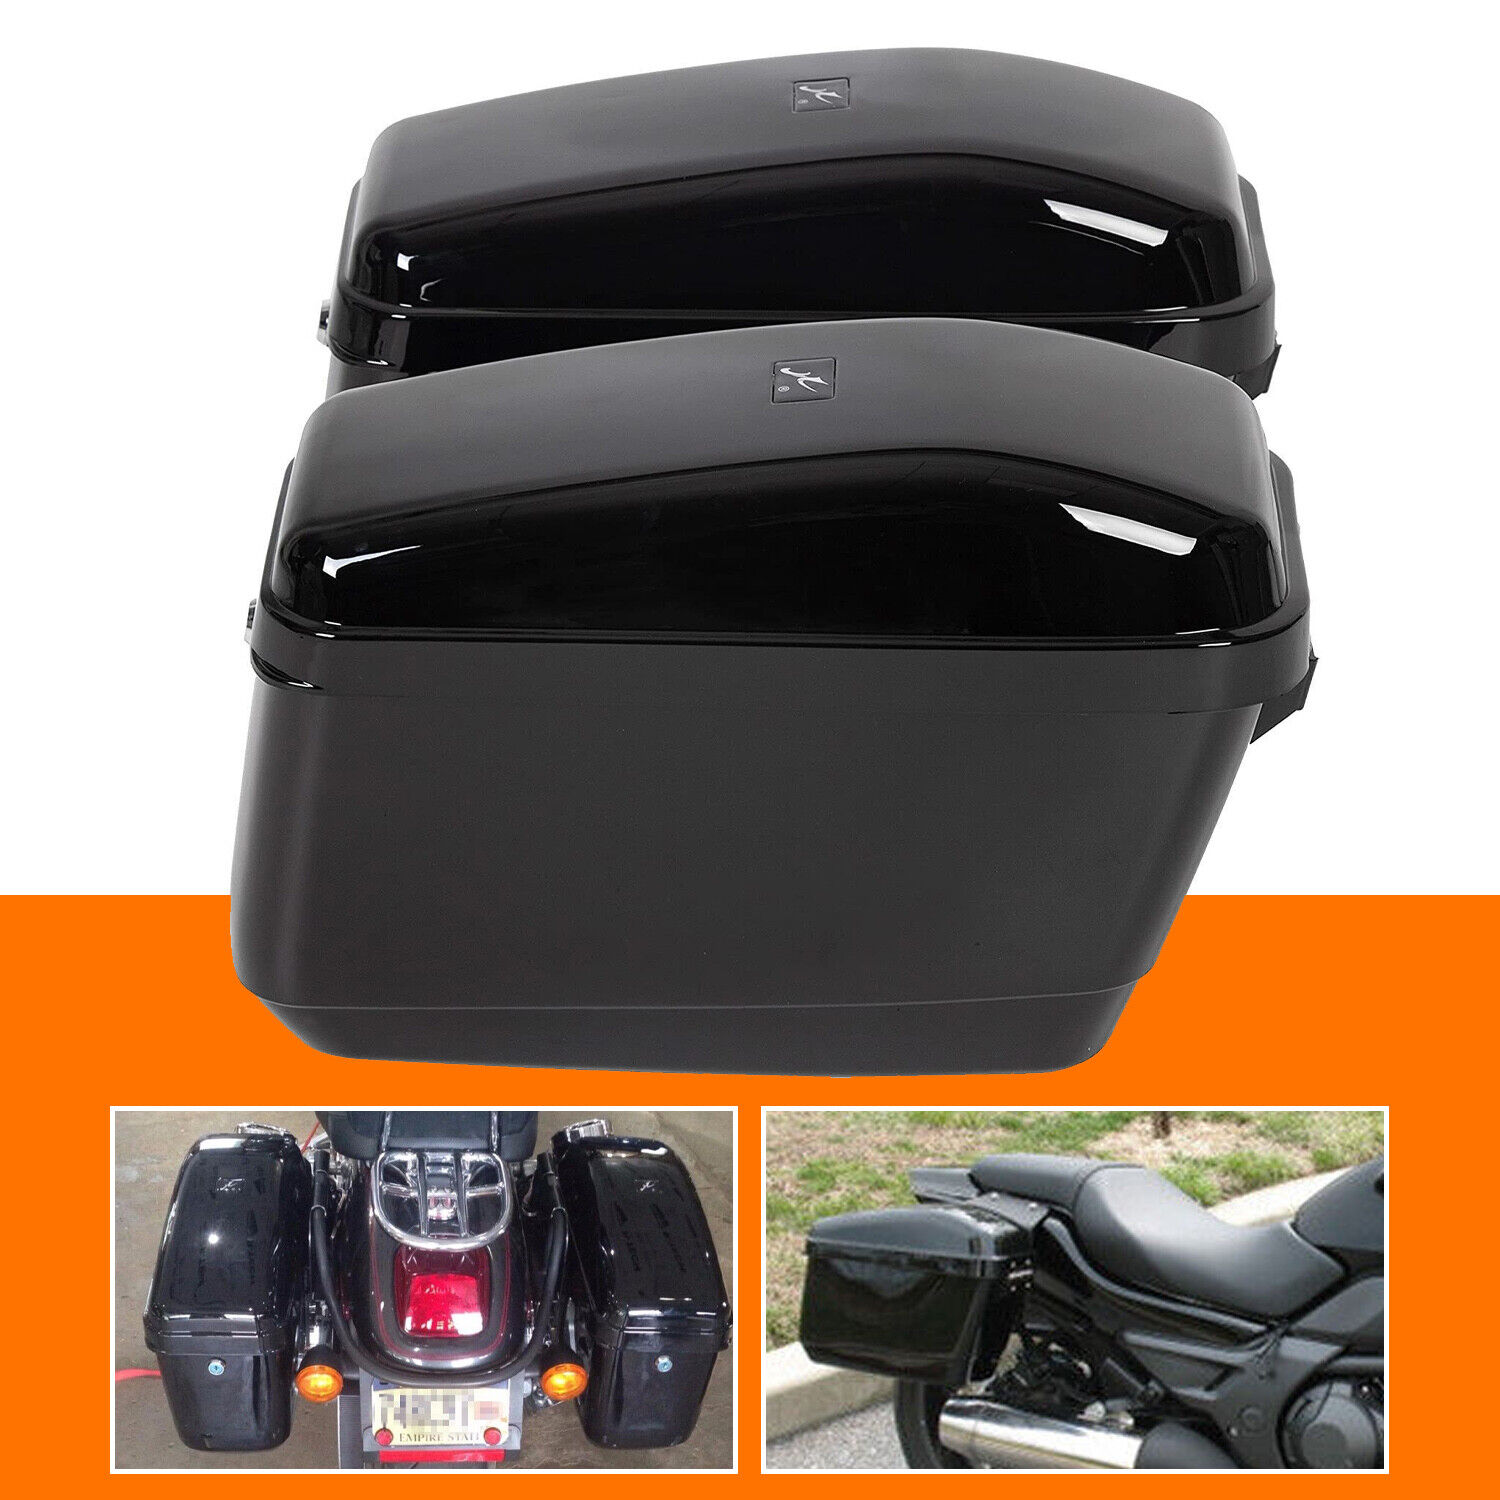 Motorcycle Hard Saddle bags Side Box For Harley Davidson Sportster Softail Dyna